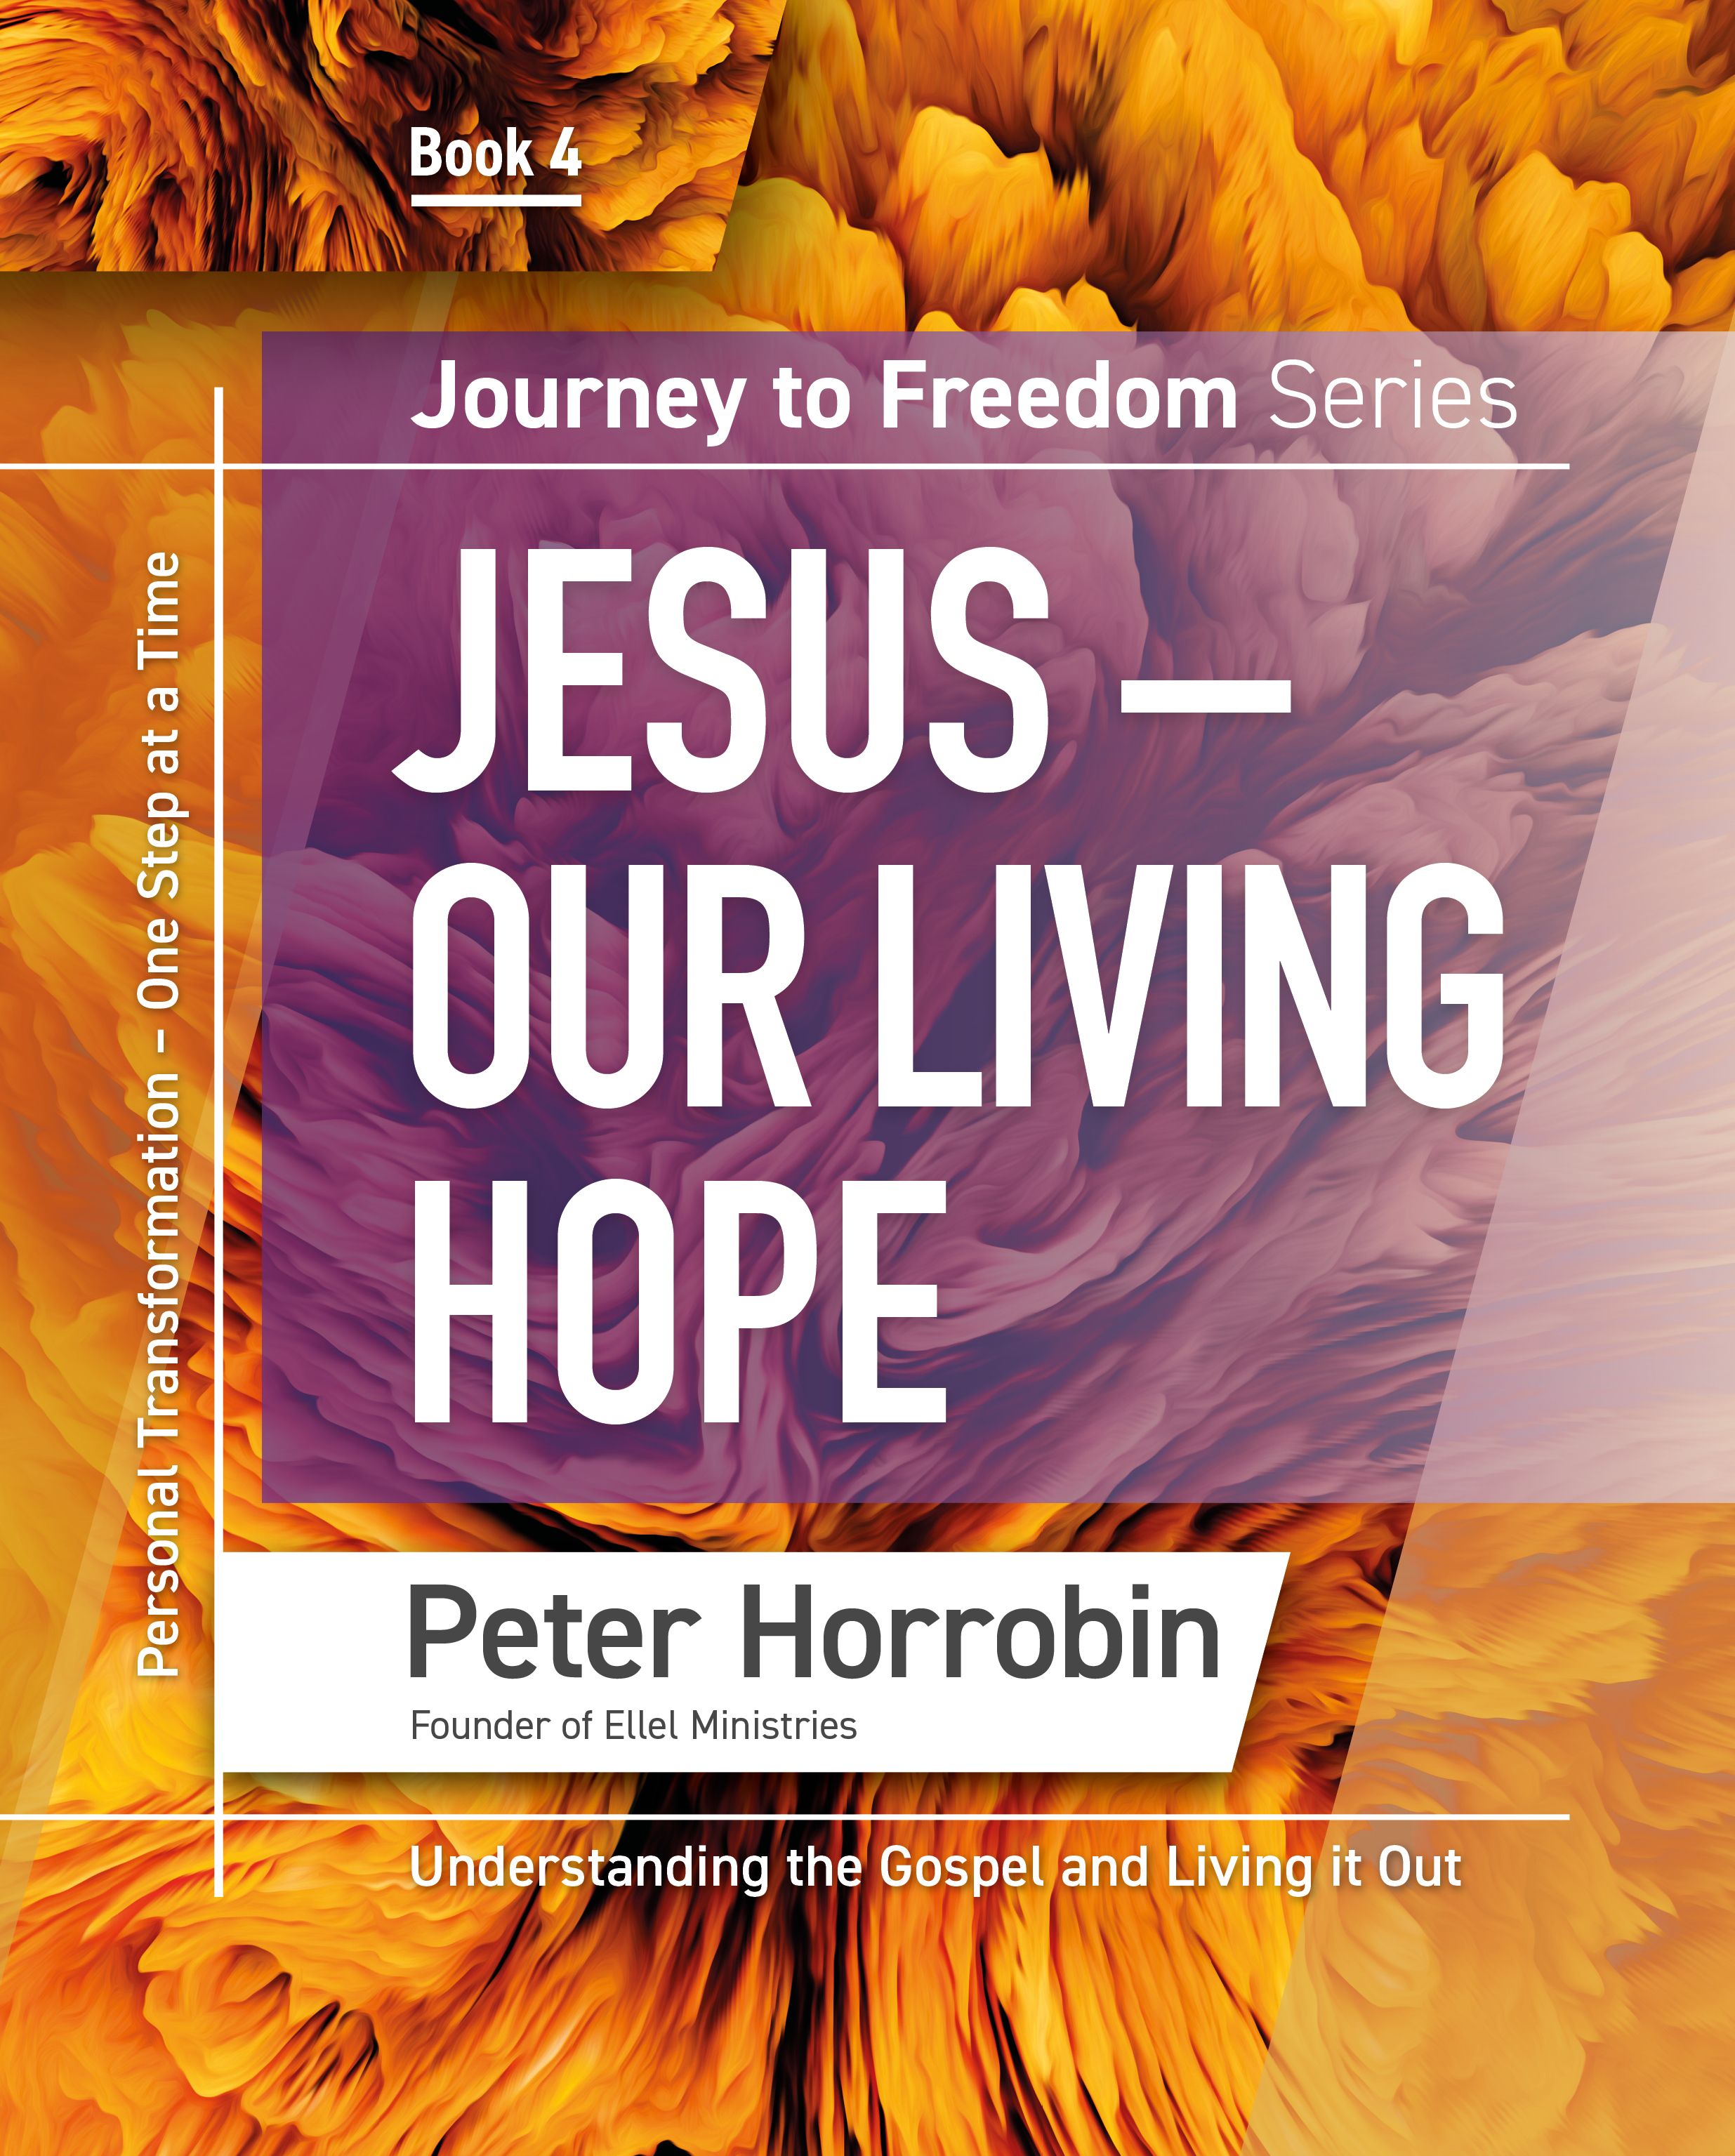 Journey to Freedom Book 4 - Jesus, Our Living Hope